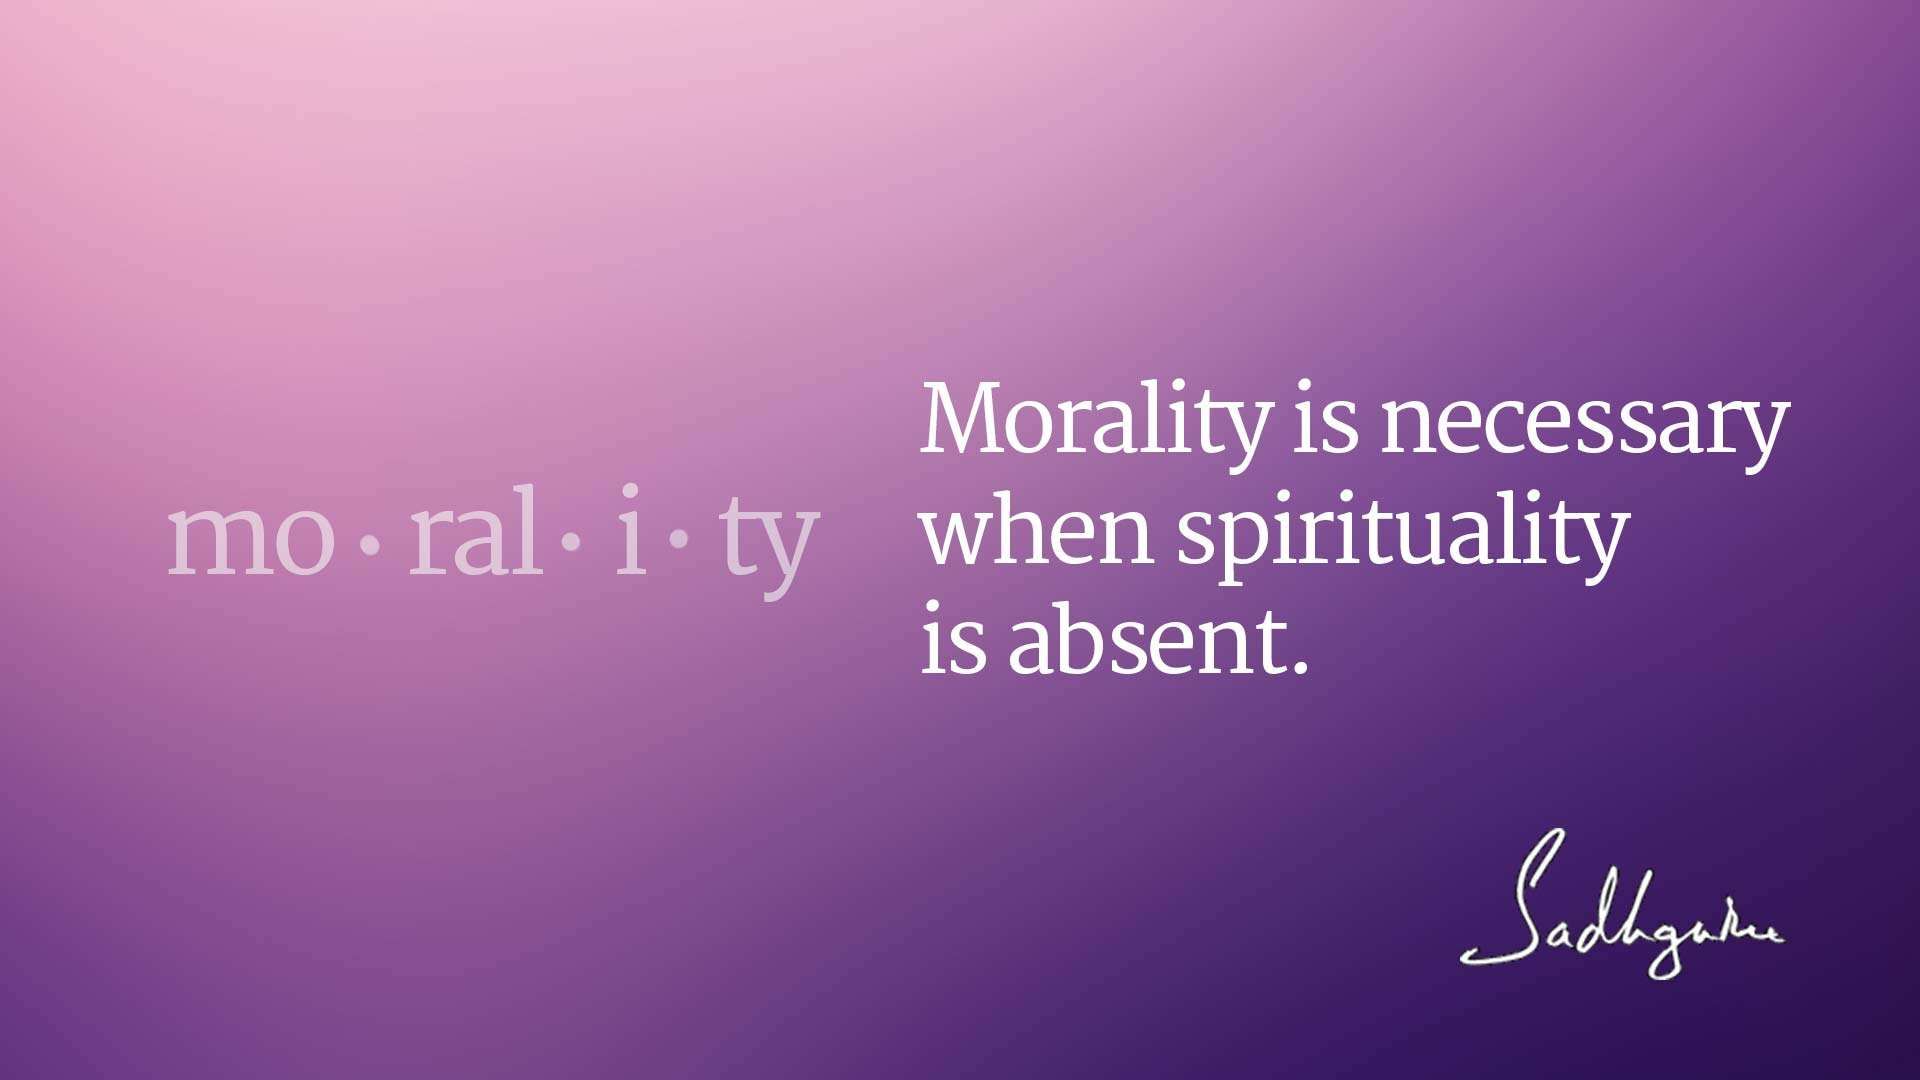 Quotes on Morality by Sadhguru